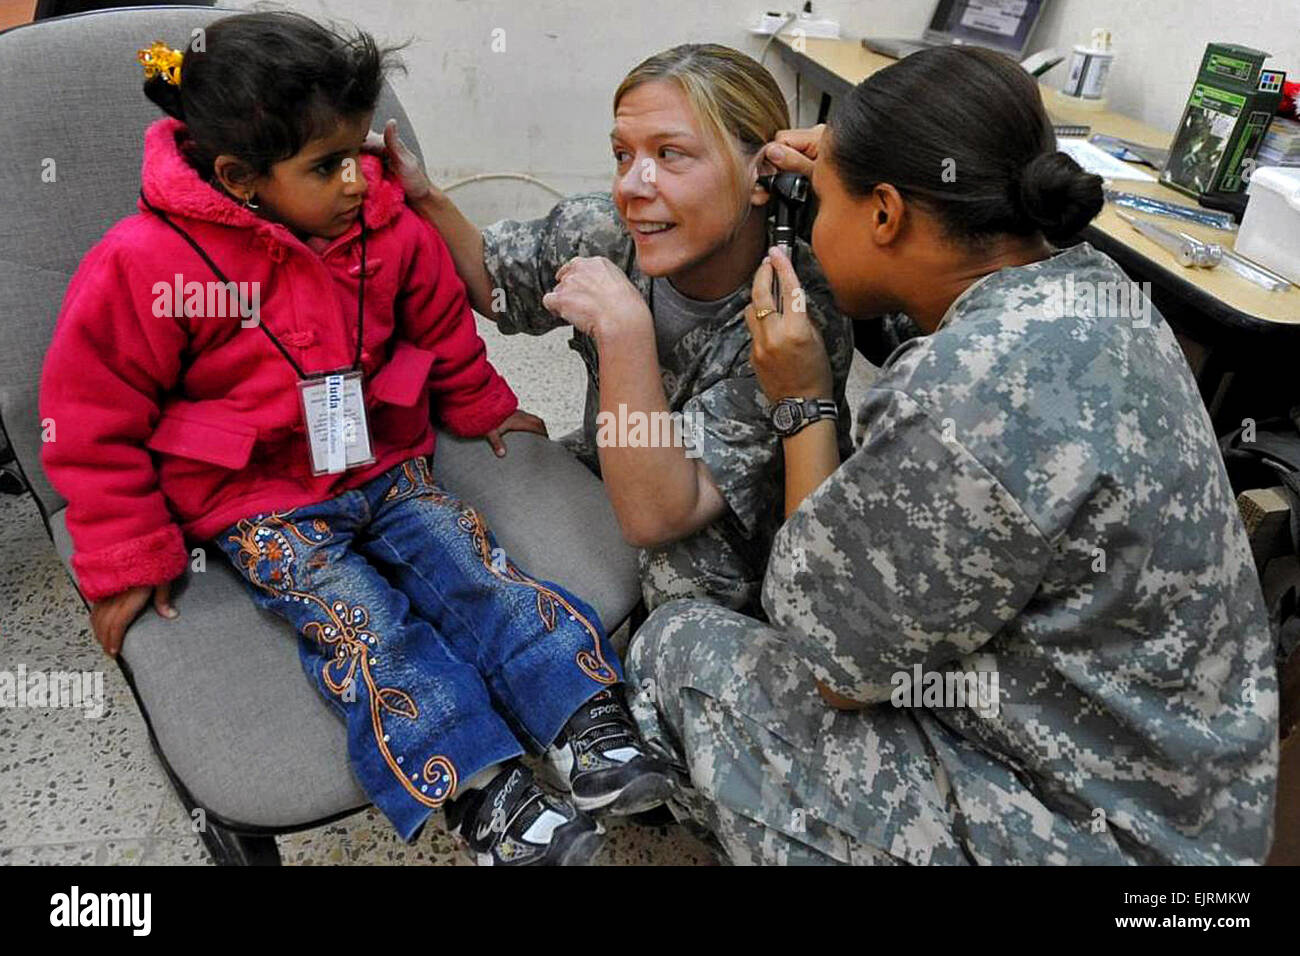 Capt. Lori August and Capt. Ramona Toussant show a hearing-impaired Iraqi girl from Rumaythuh, Iraq, how they administer a hearing examination, Dec. 11, 2008. The Iraqi girl is visiting Combat Operations Base Adder in Tallil, Iraq, to be tested for a hearing aid. August and Toussant are assigned to the 1st Cavalry Division's Company C, 27th Brigade Support Battalion, 4th Brigade Combat Team.   Staff Sgt. Brendan Stephens Stock Photo